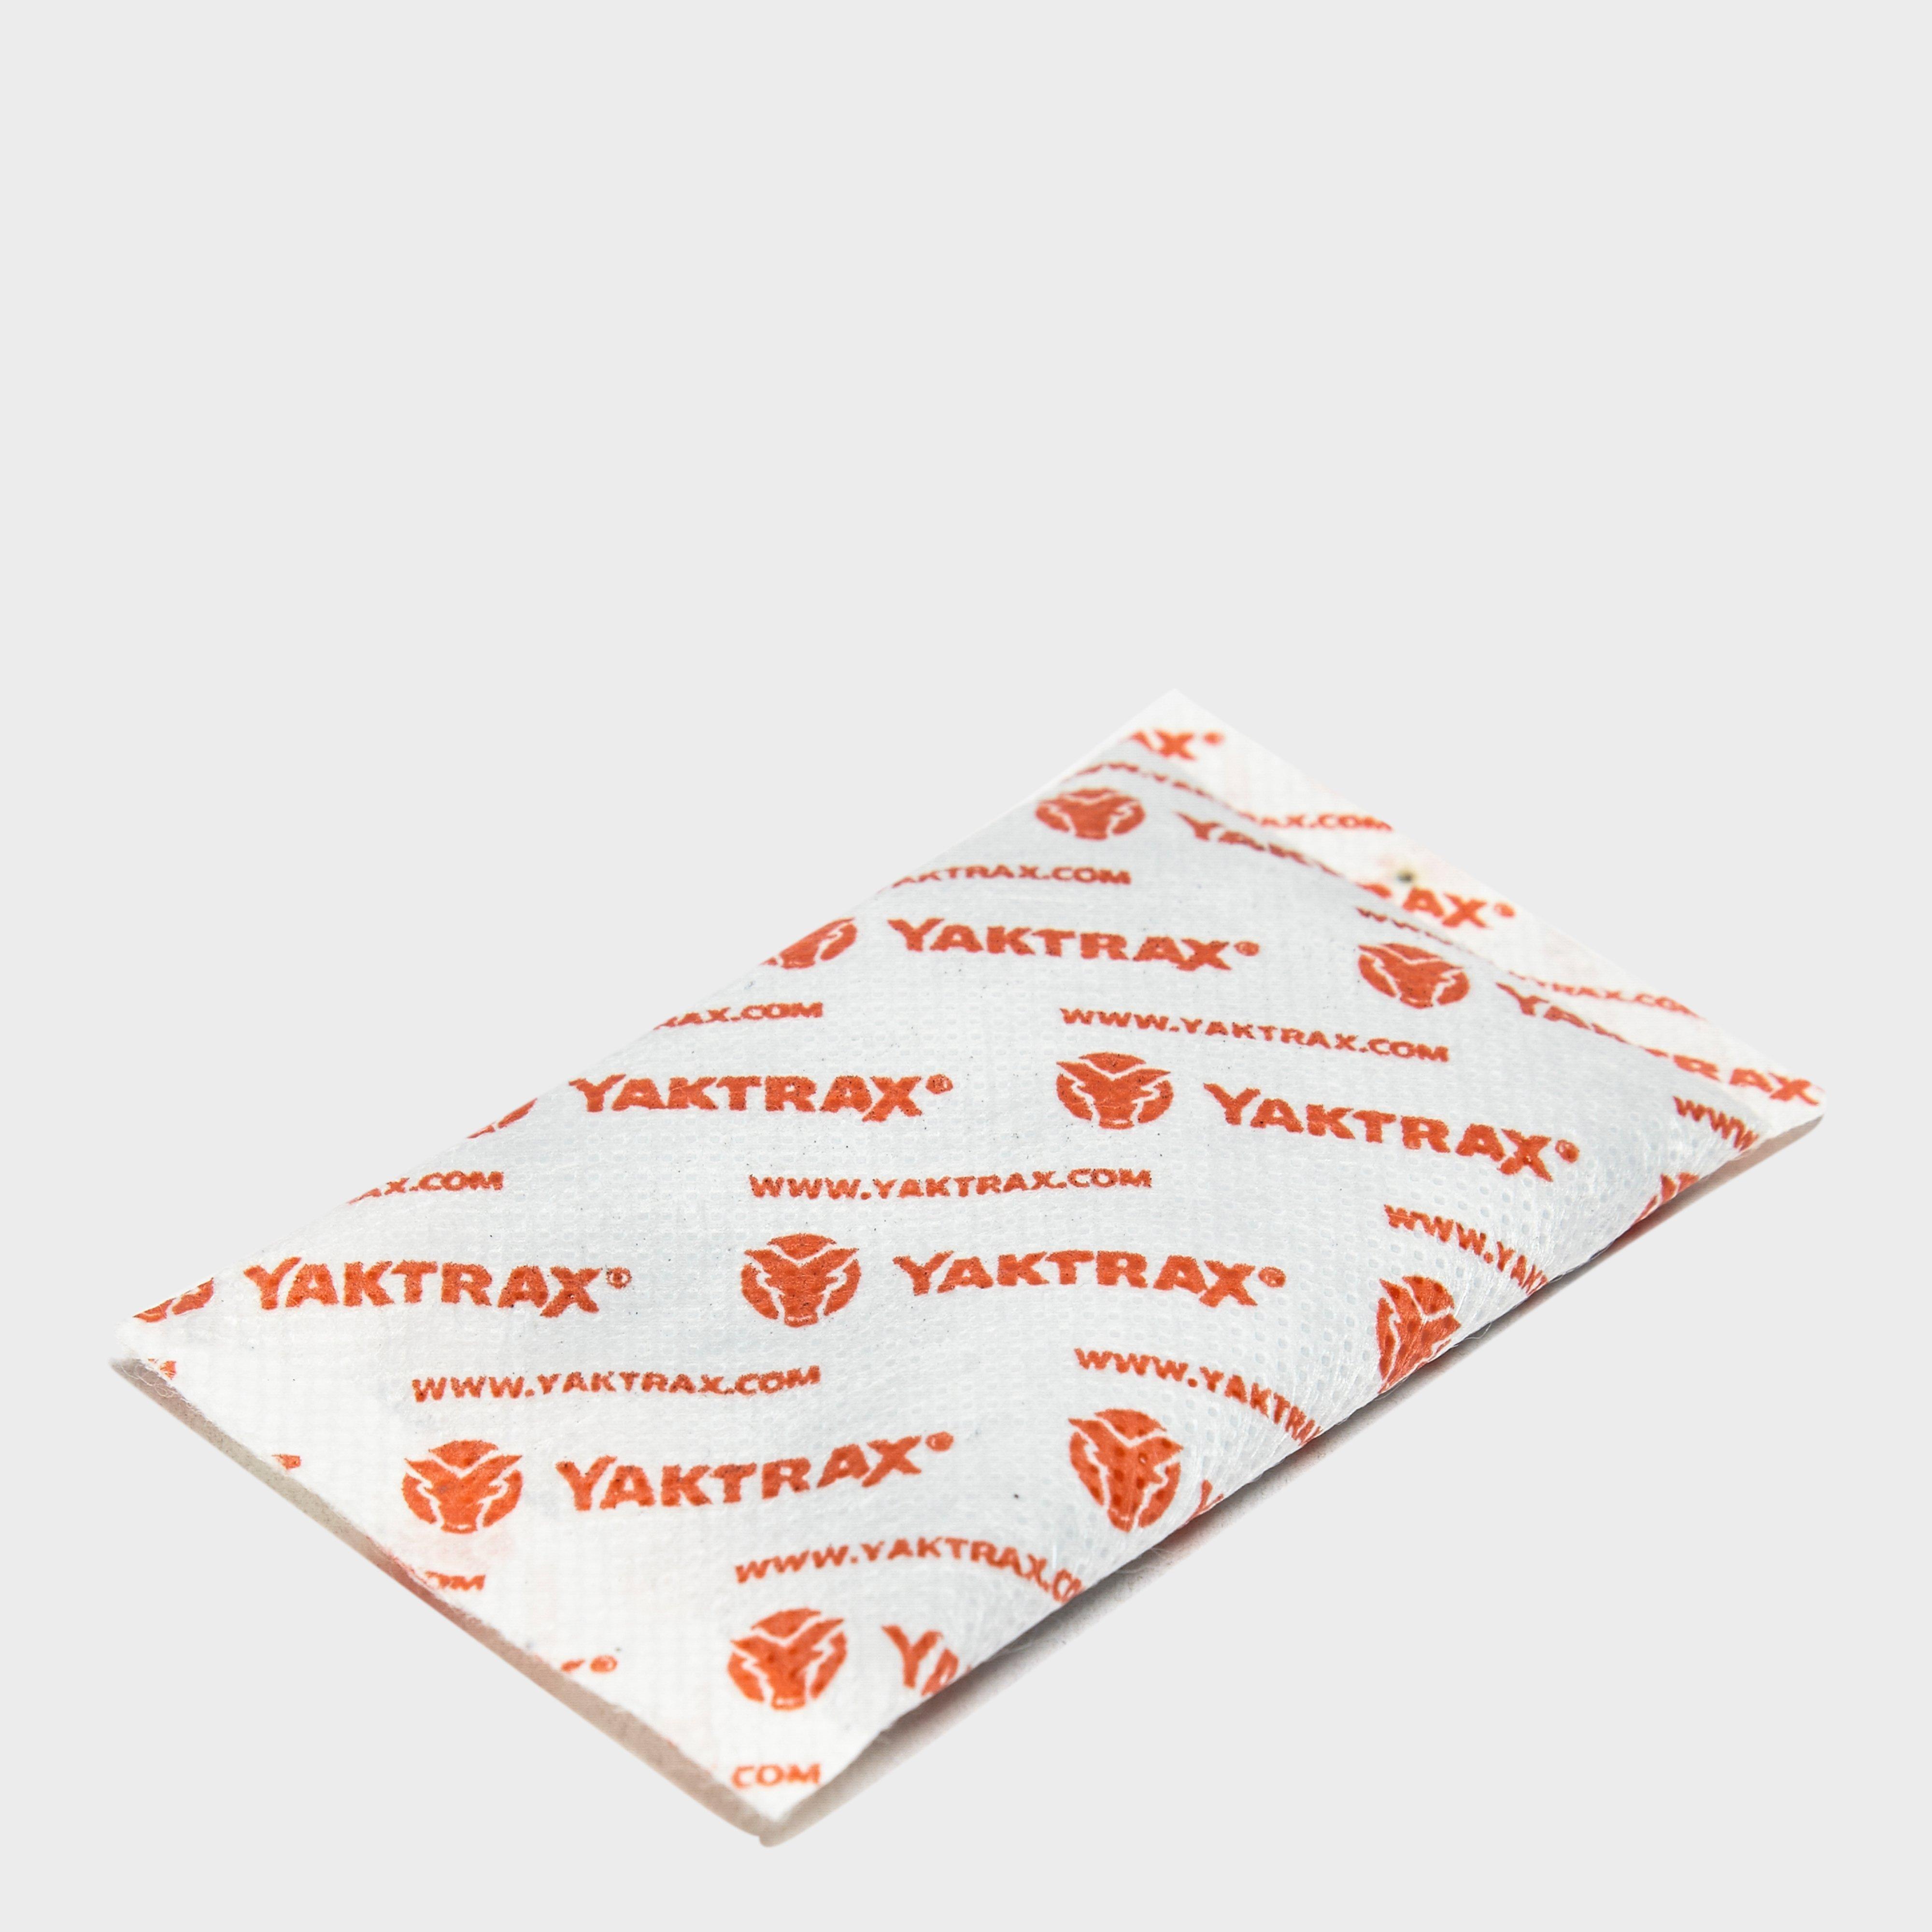 Yaktrax Hand Warmers Review